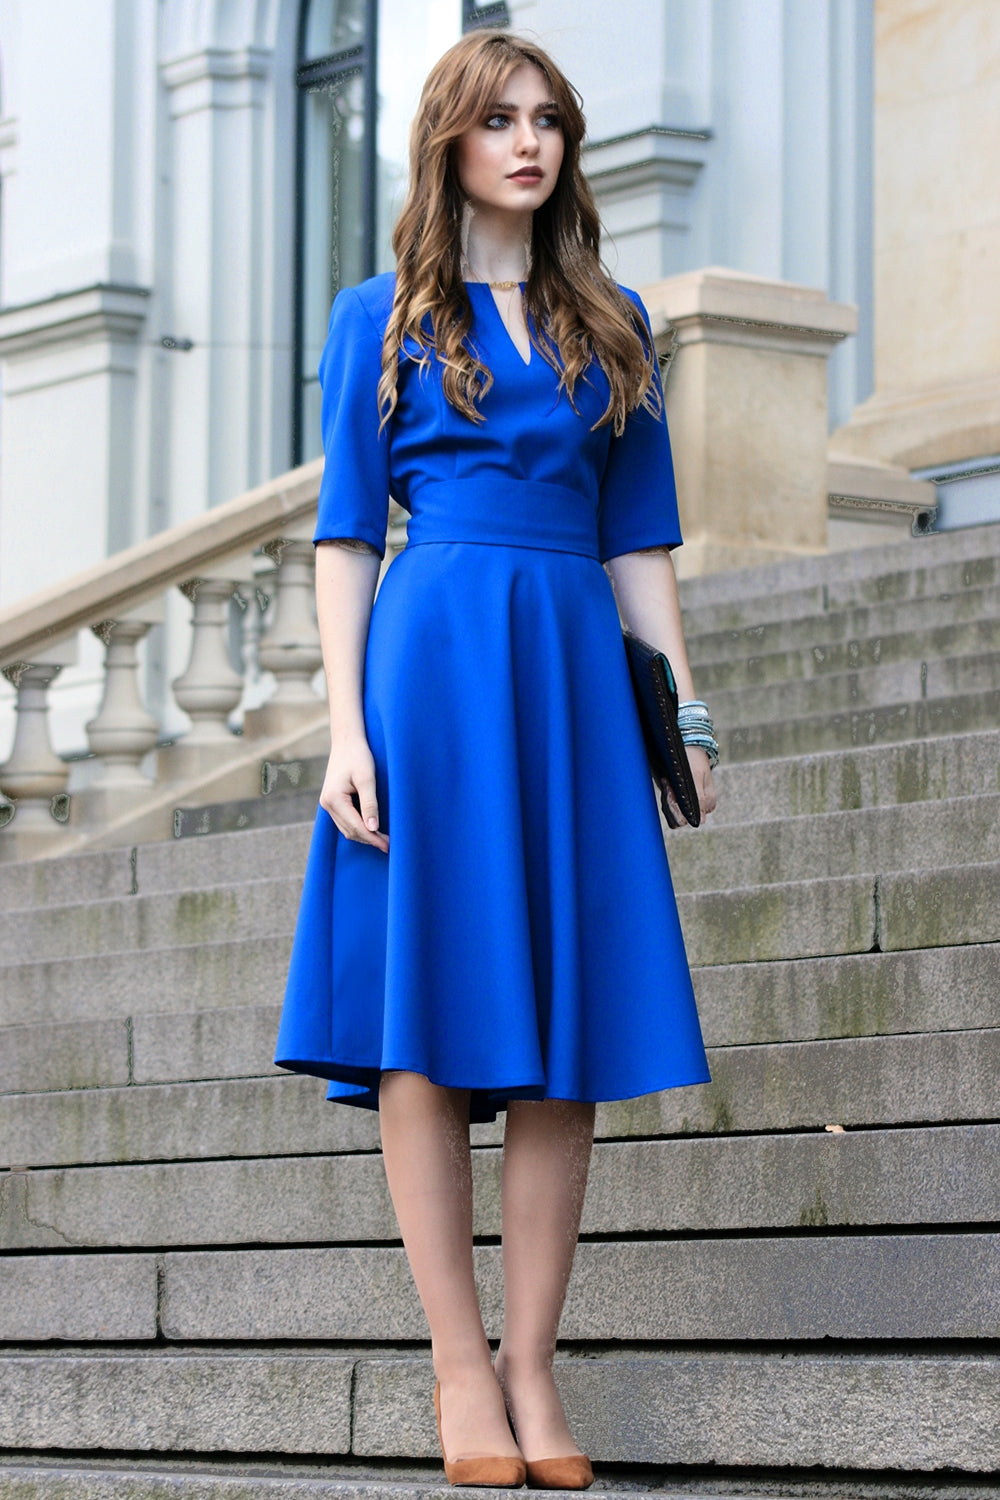 Blue dress with circle skirts. Golden color detail in neckline